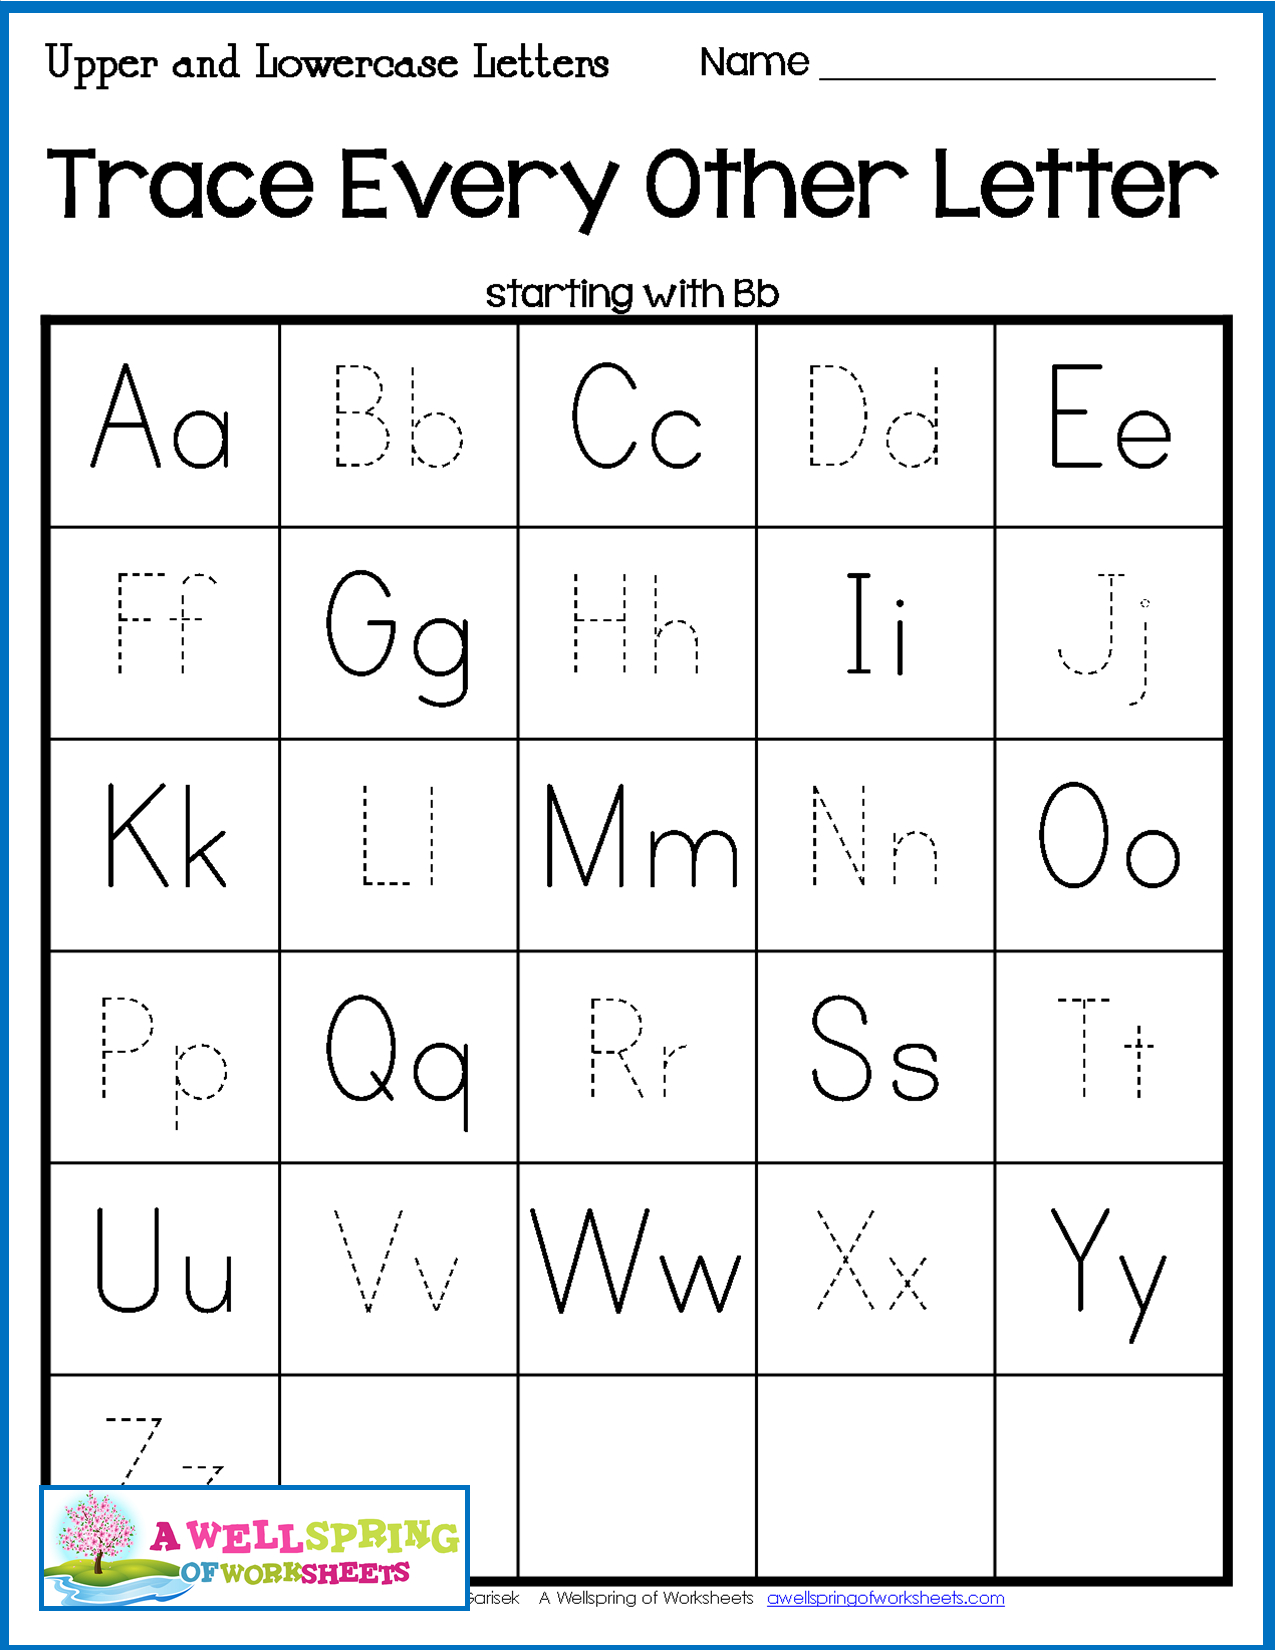 Uppercase And Lowercase Letters Tracing Worksheet TracingLettersWorksheets